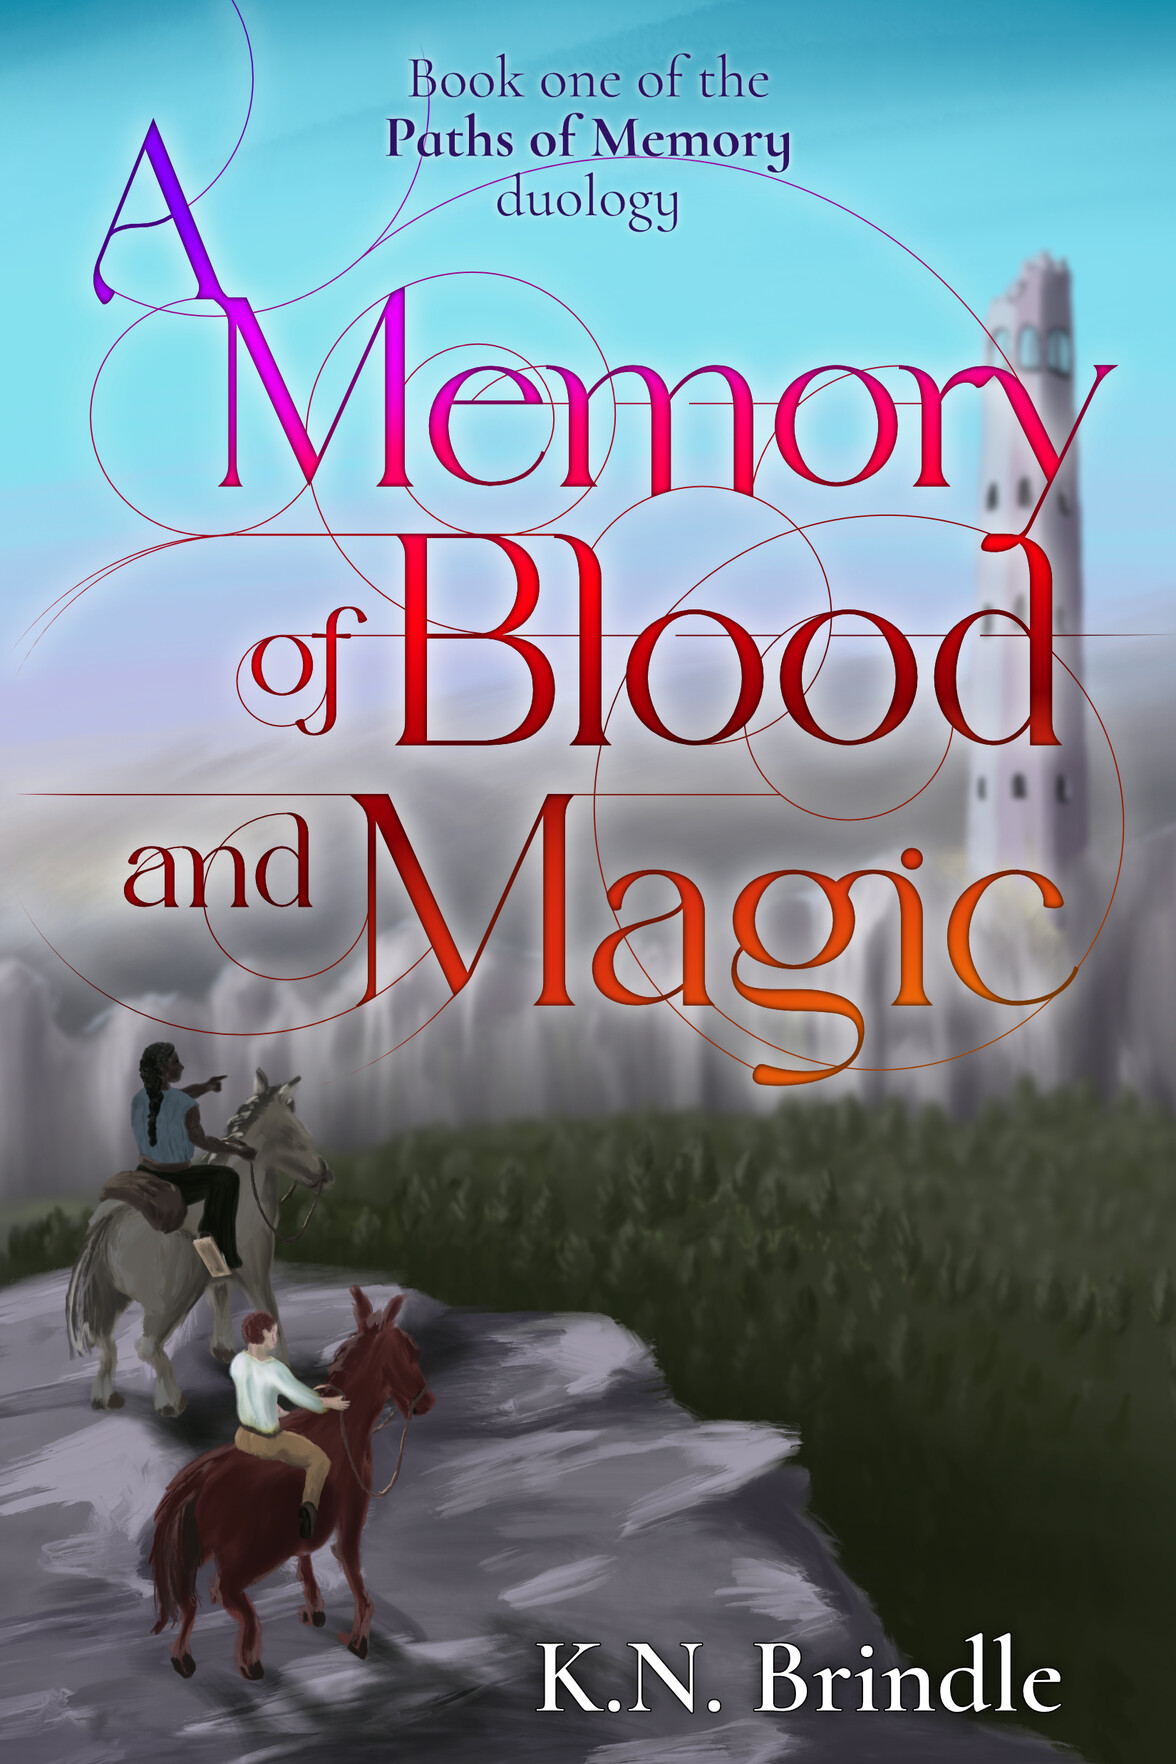 Book cover: A Memory of Blood and Magic, book one of the Paths of Memory duology.

Art Description: Two people riding mules at the edge of a cliff in the foreground, facing away into the distance. One is pointing across a densely forested valley to distant cliffs where a ruined tower rises against a blue and pink sky.

The title of the book fills the cover in a smooth gradient from purple to blood red, with circular tracery extending from the letters serifs and ascenders to form a web of intersecting paths.